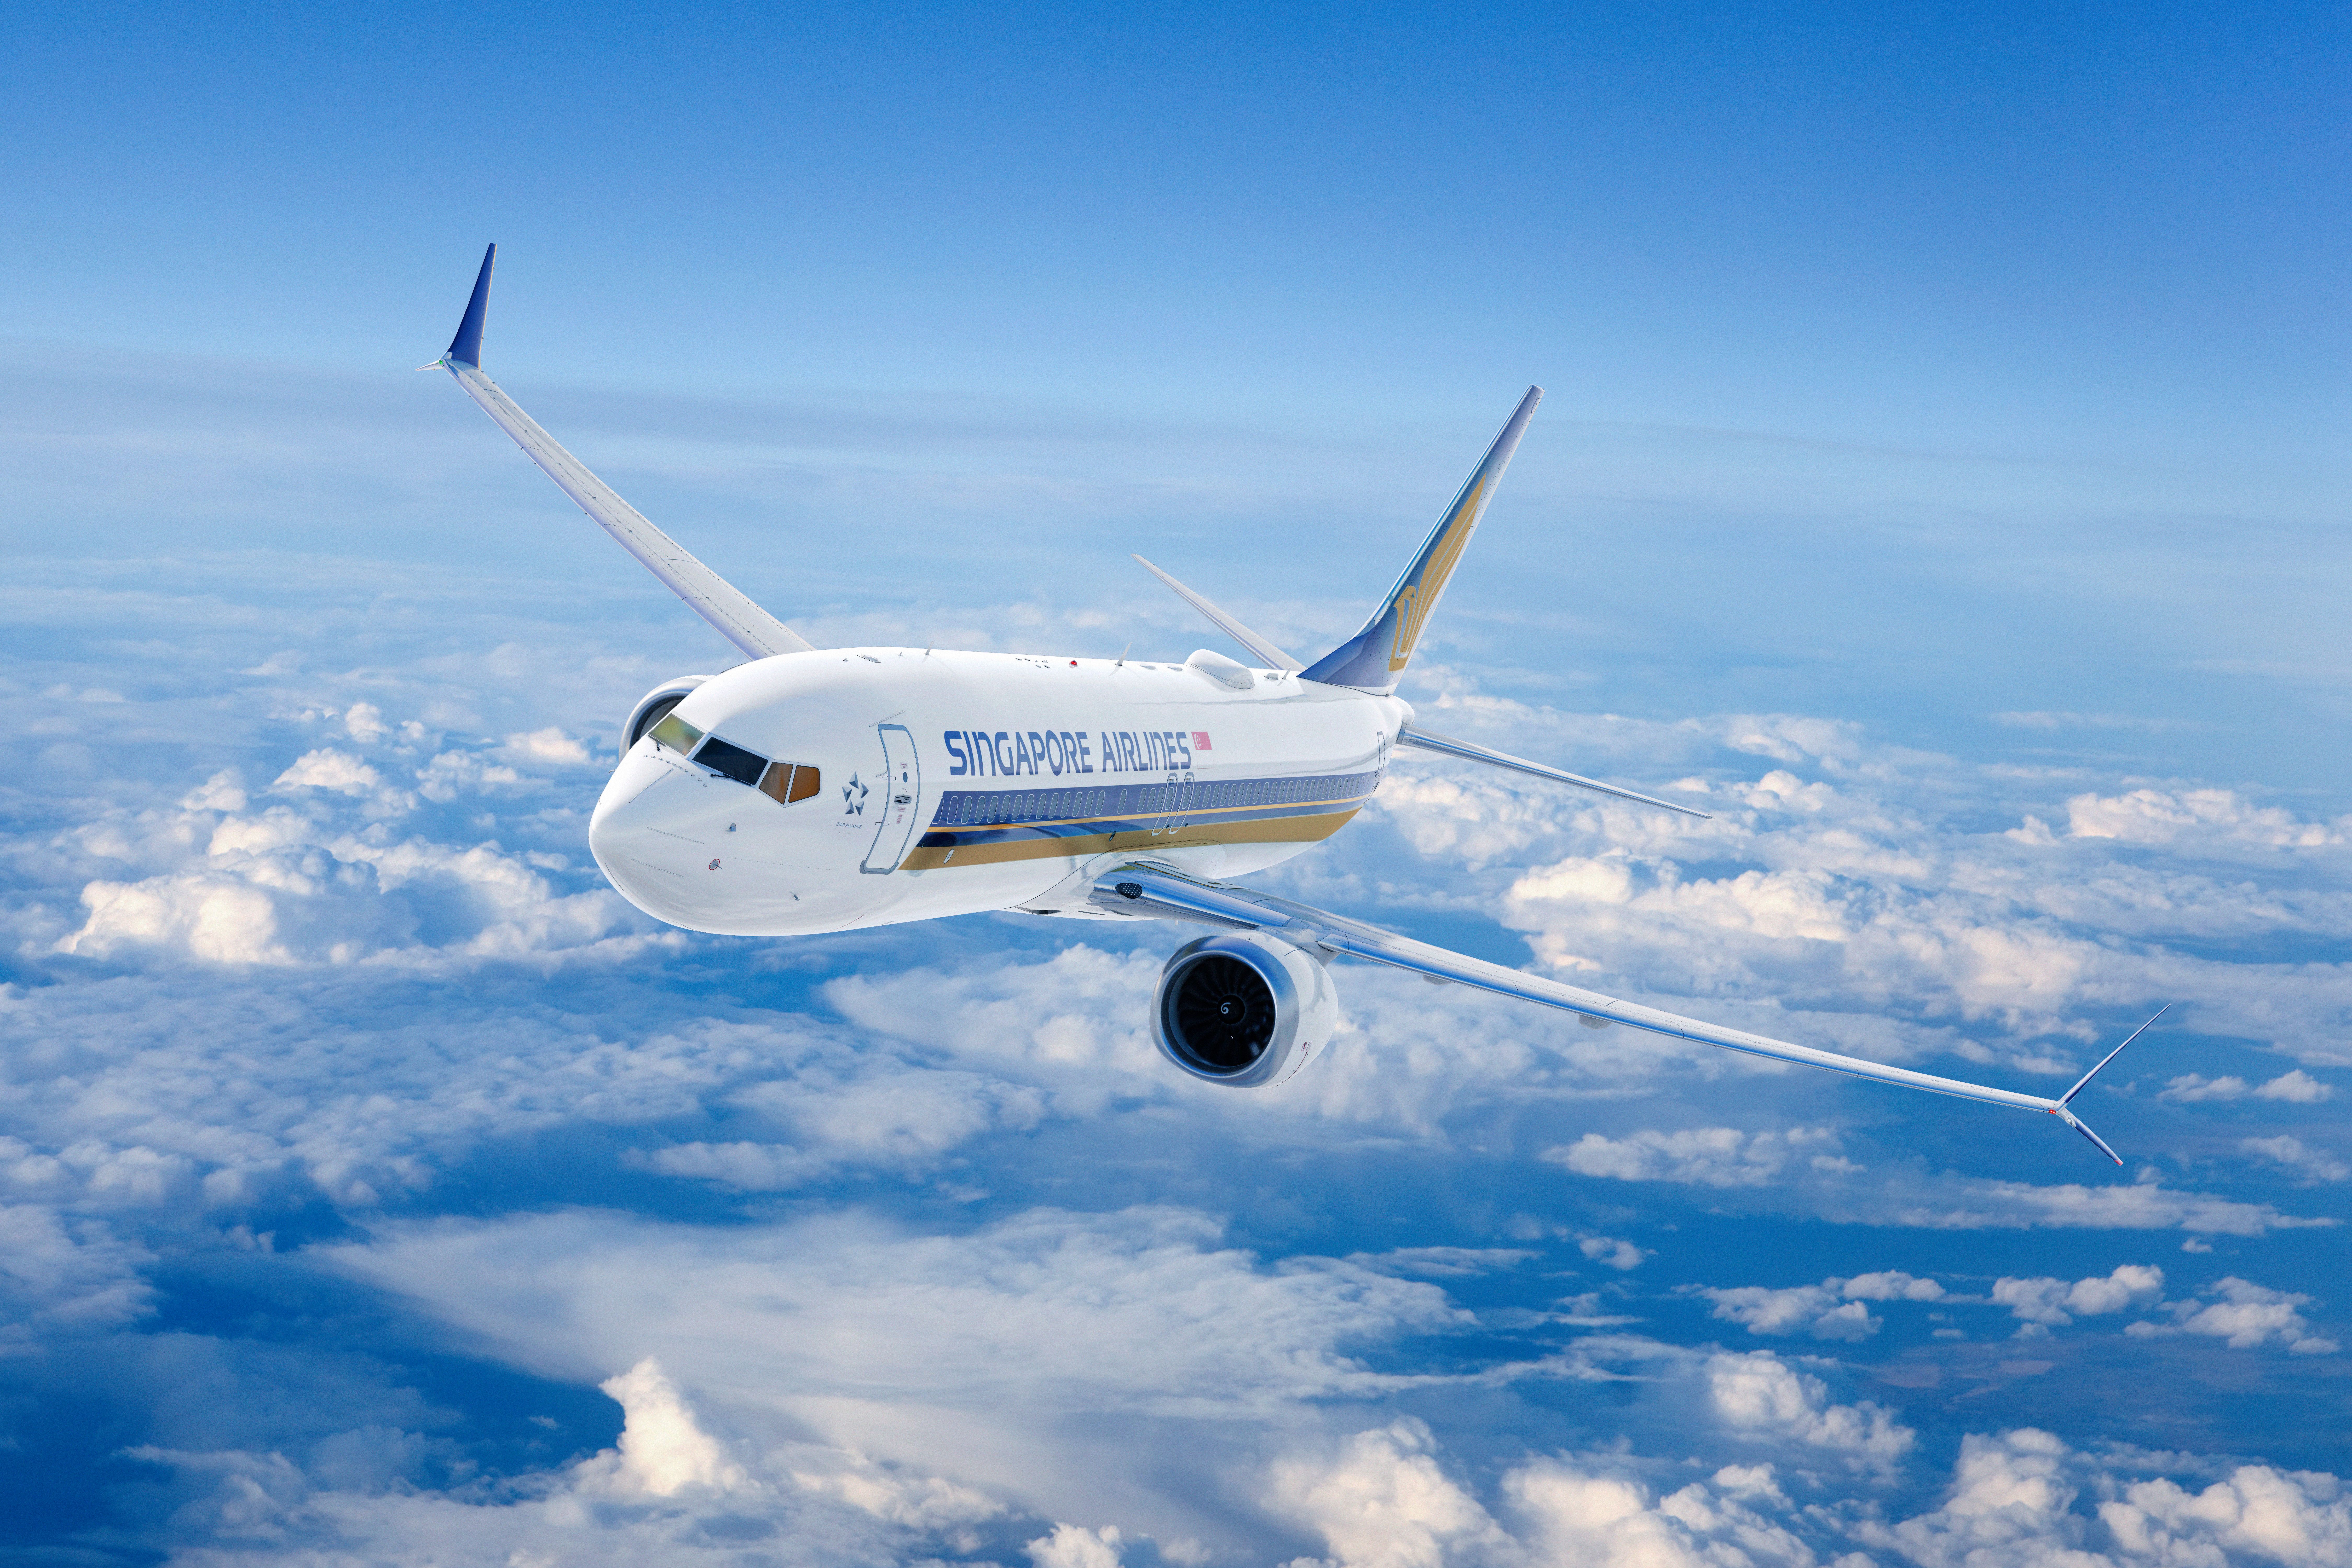 Singapore Airlines Boeing 737 MAX 8 in flight